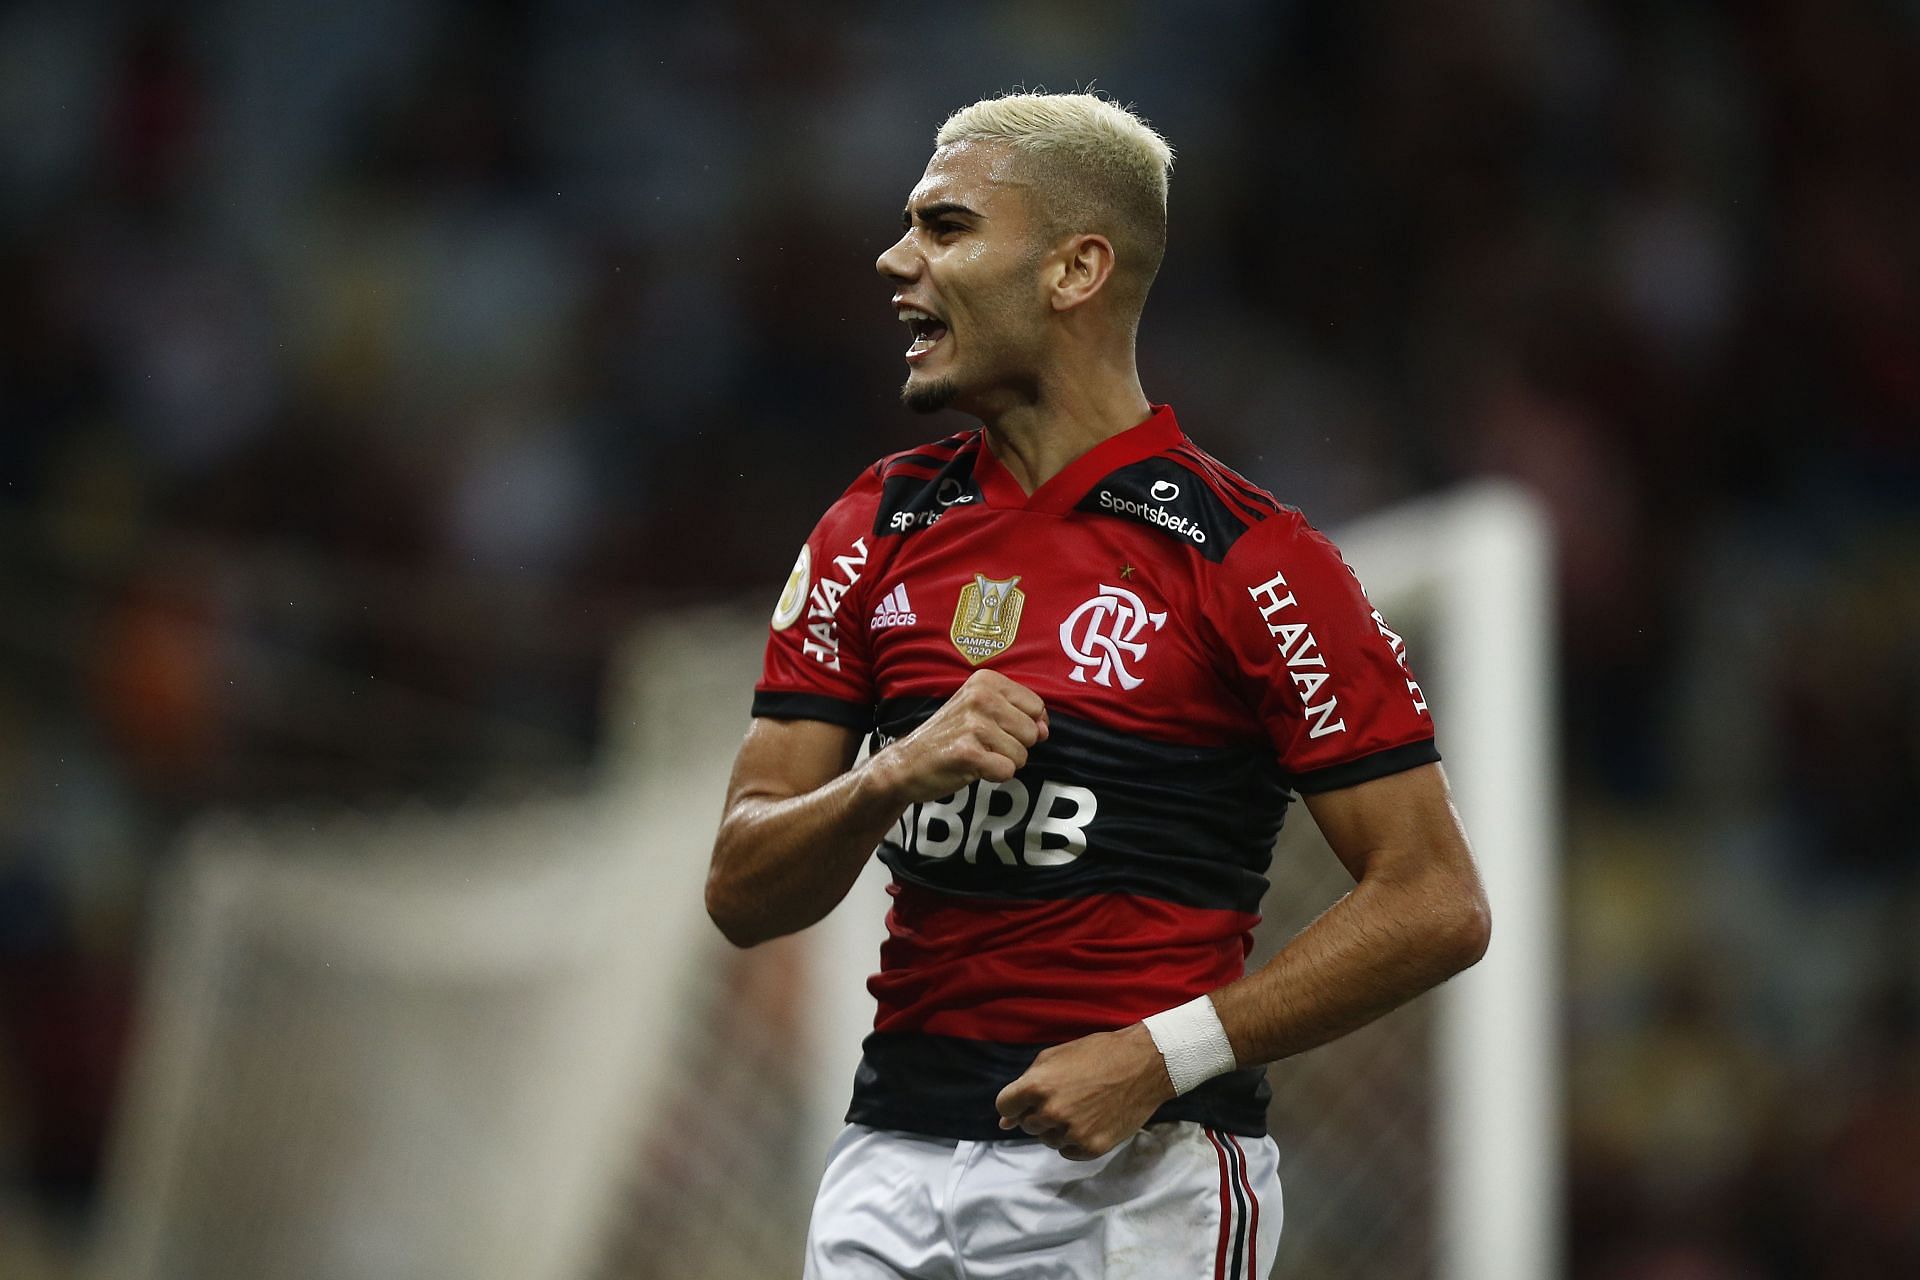 Andreas Pereira in action for Flamengo.